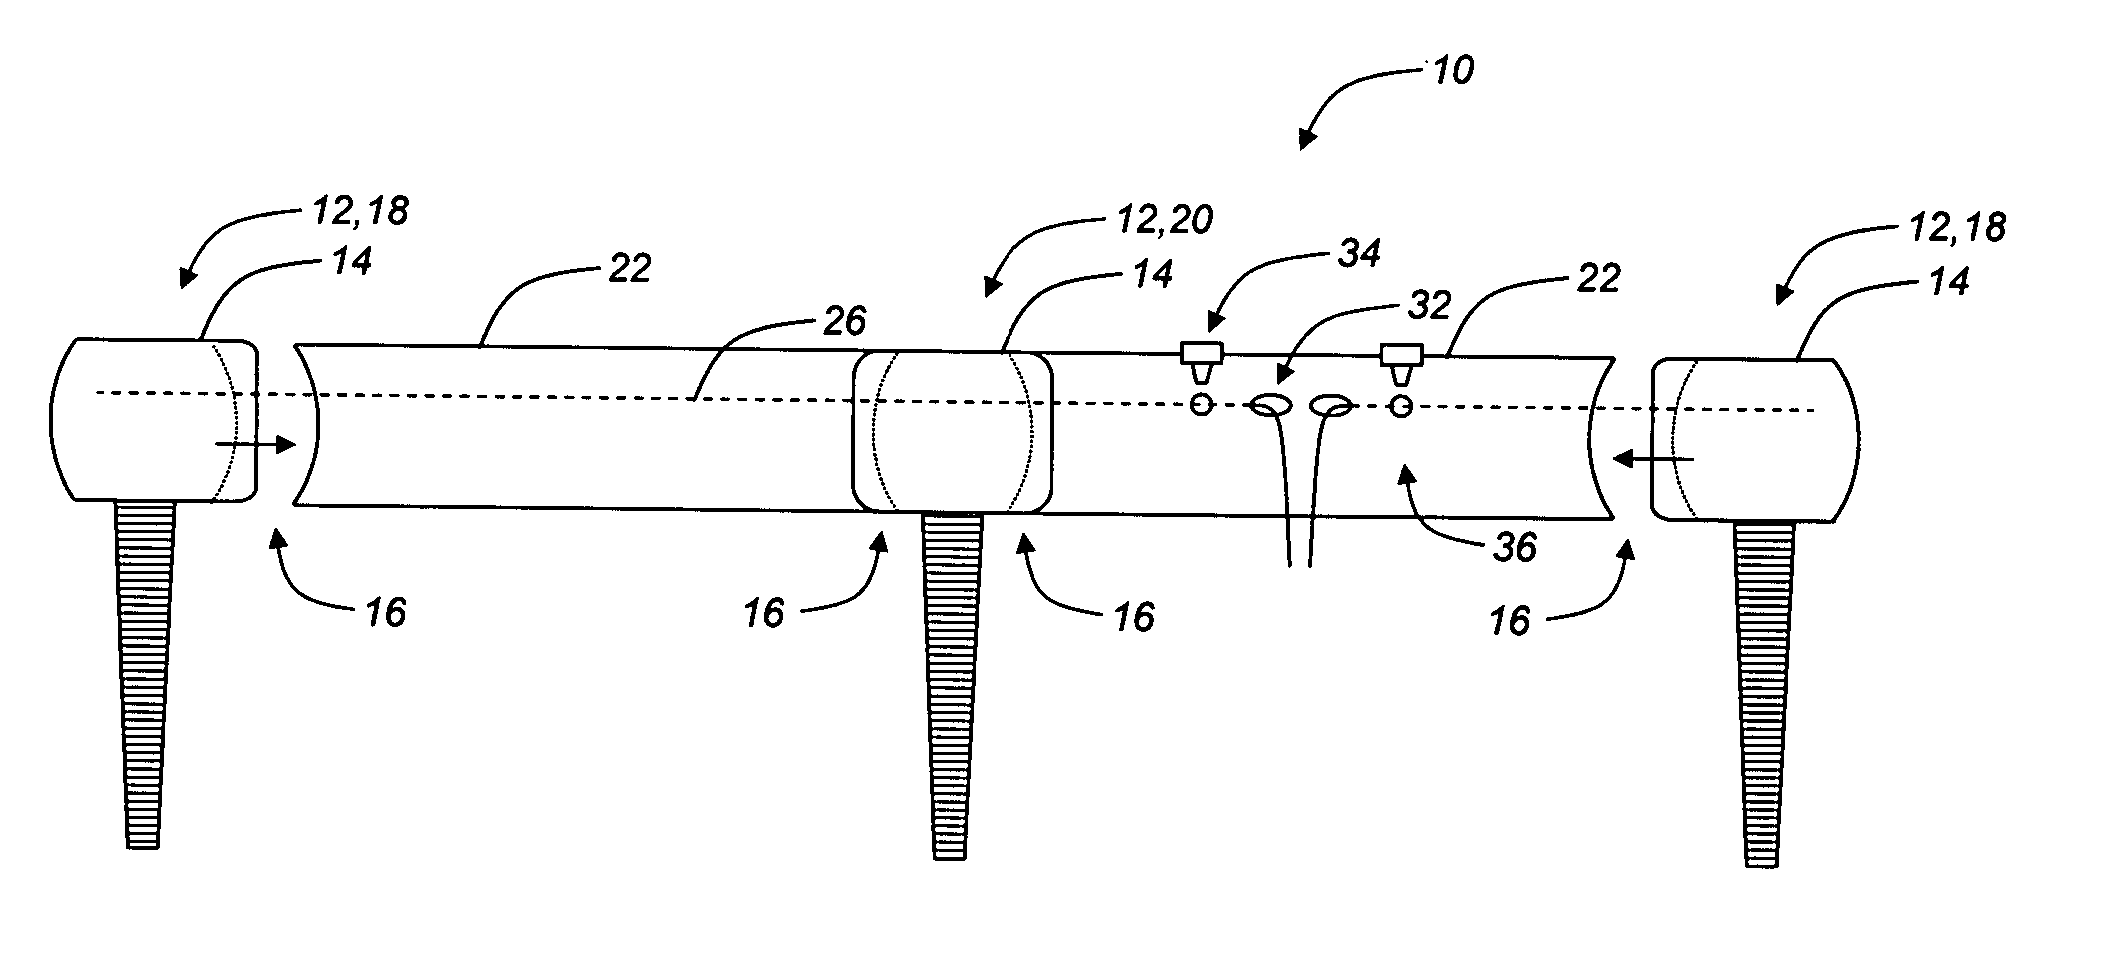 Pedicle screw-based dynamic posterior stabilization systems and methods